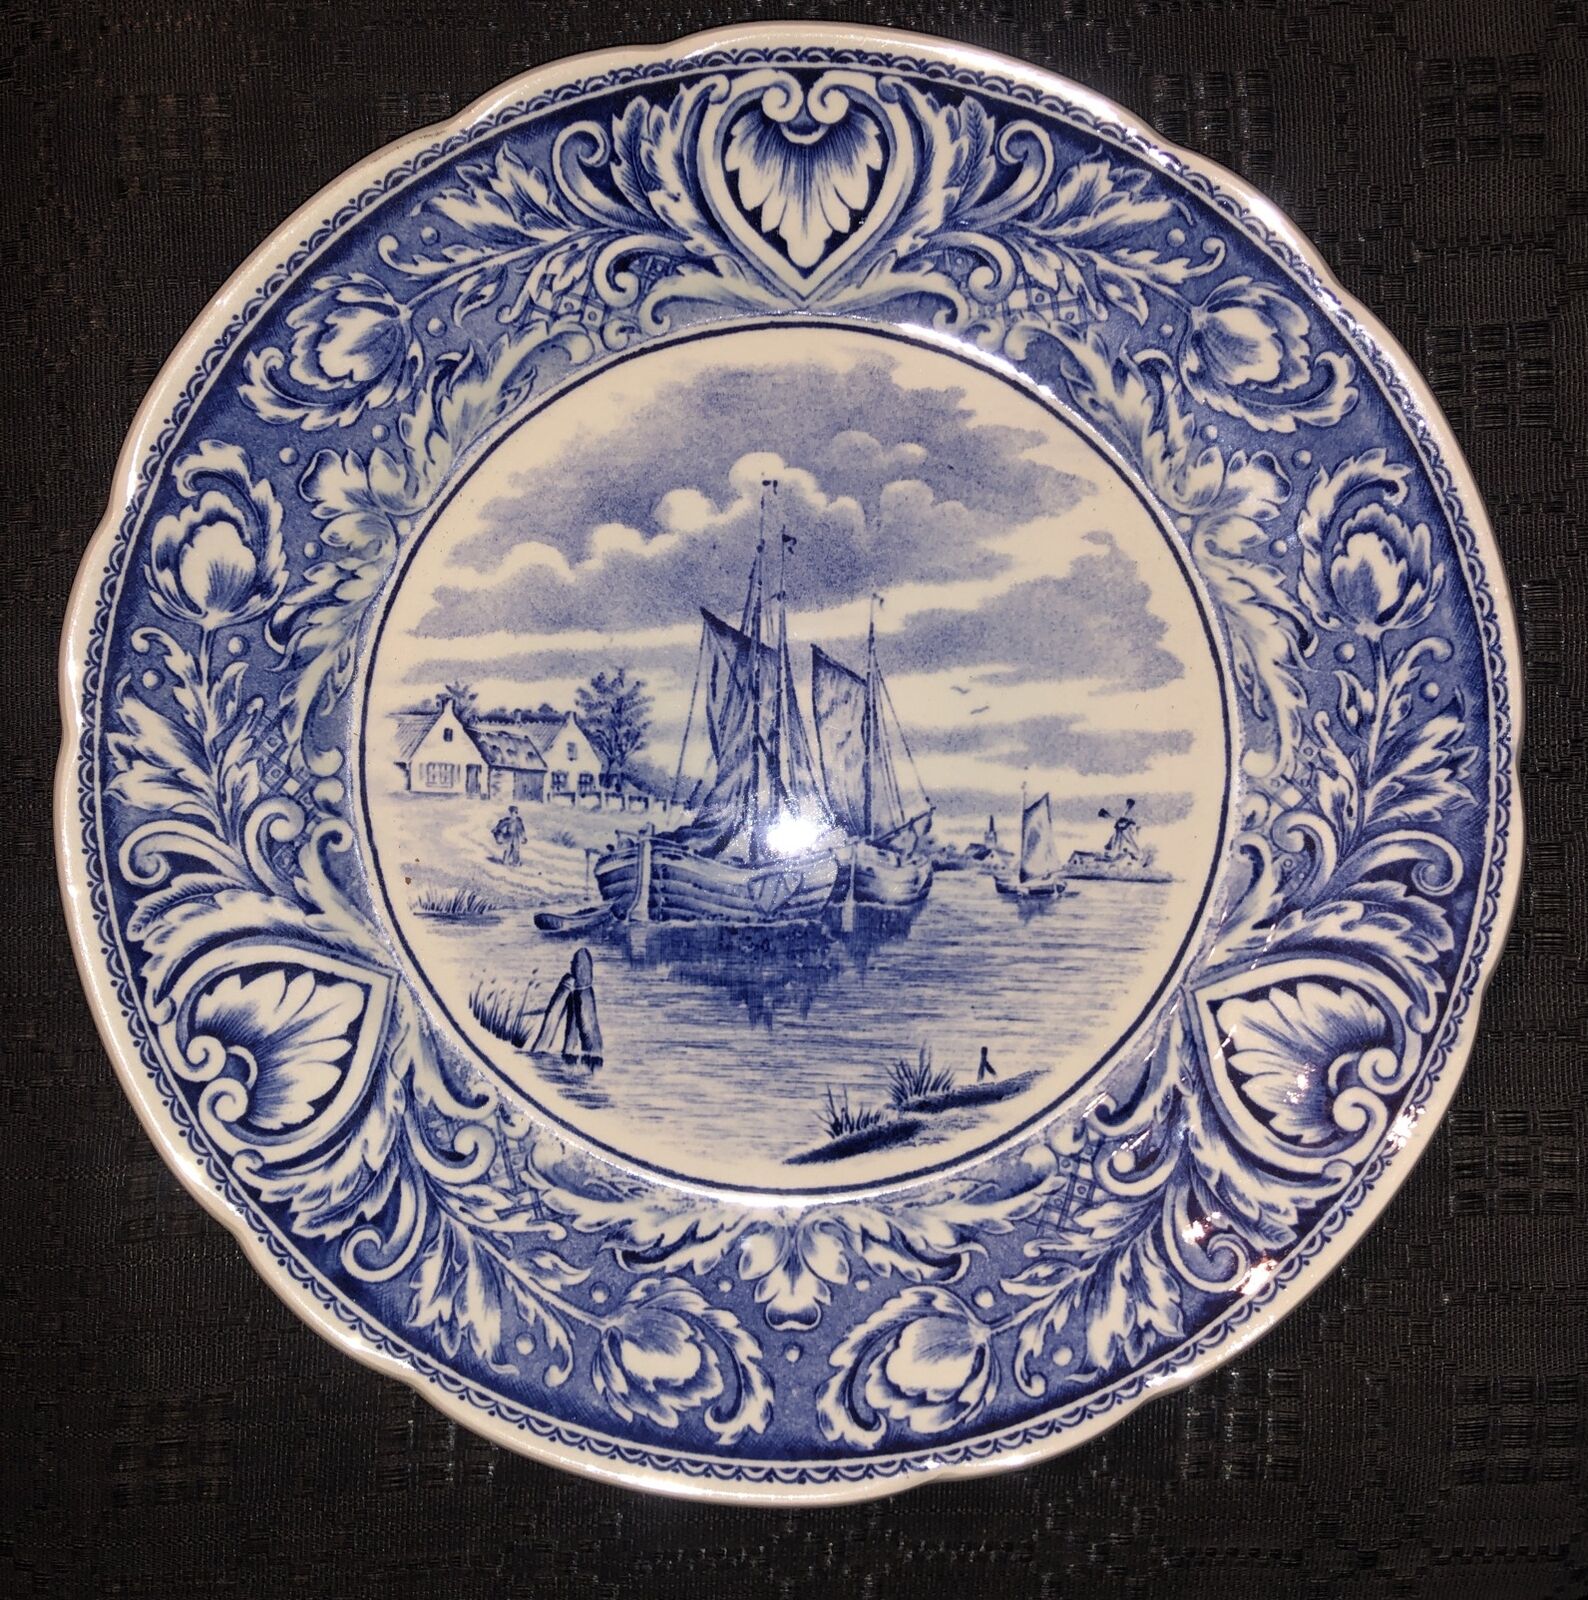 Royal Sphinx Holland Boch Delfts Blue & White Collector Plate Sailboats Windmill